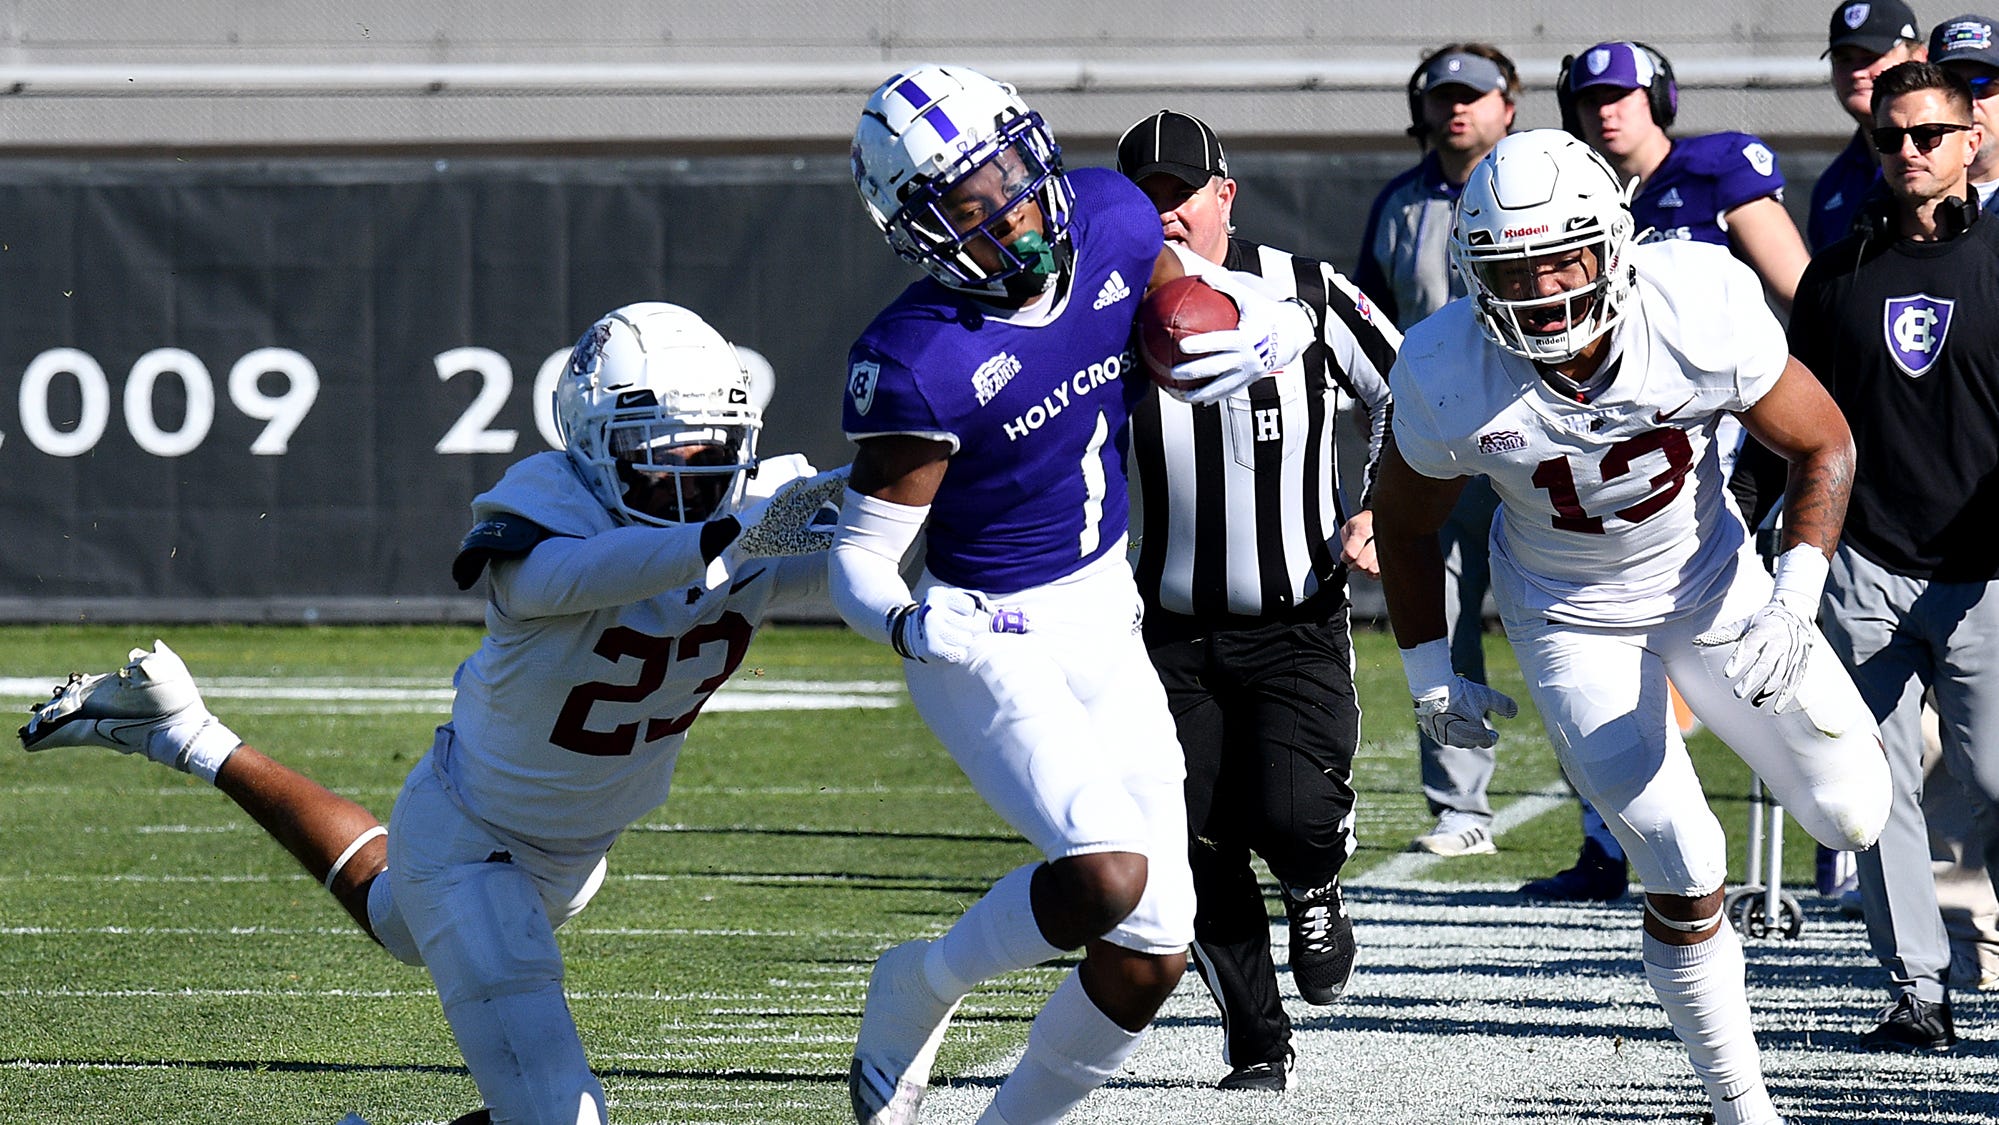 Holy Cross football, NCAA FCS playoffs, first round at home, Fitton